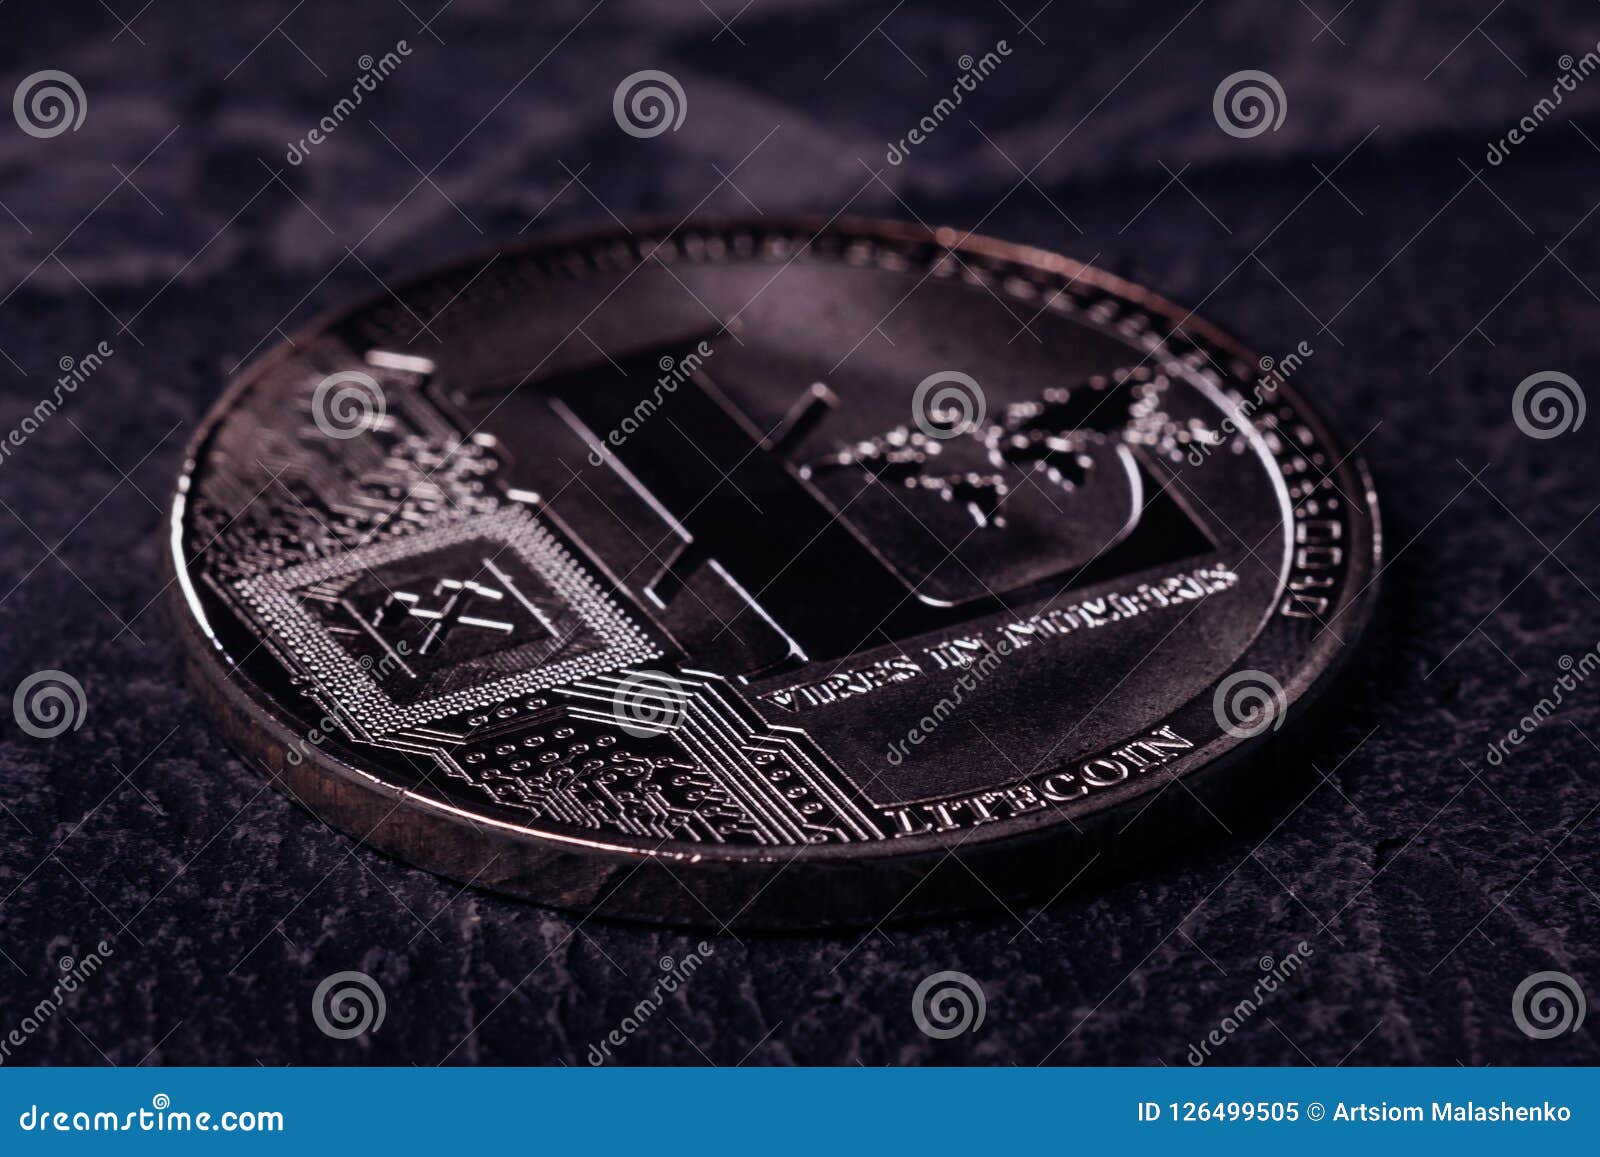 Metal Coin Of Crypto Currency Litecoin Close-up Stock ...